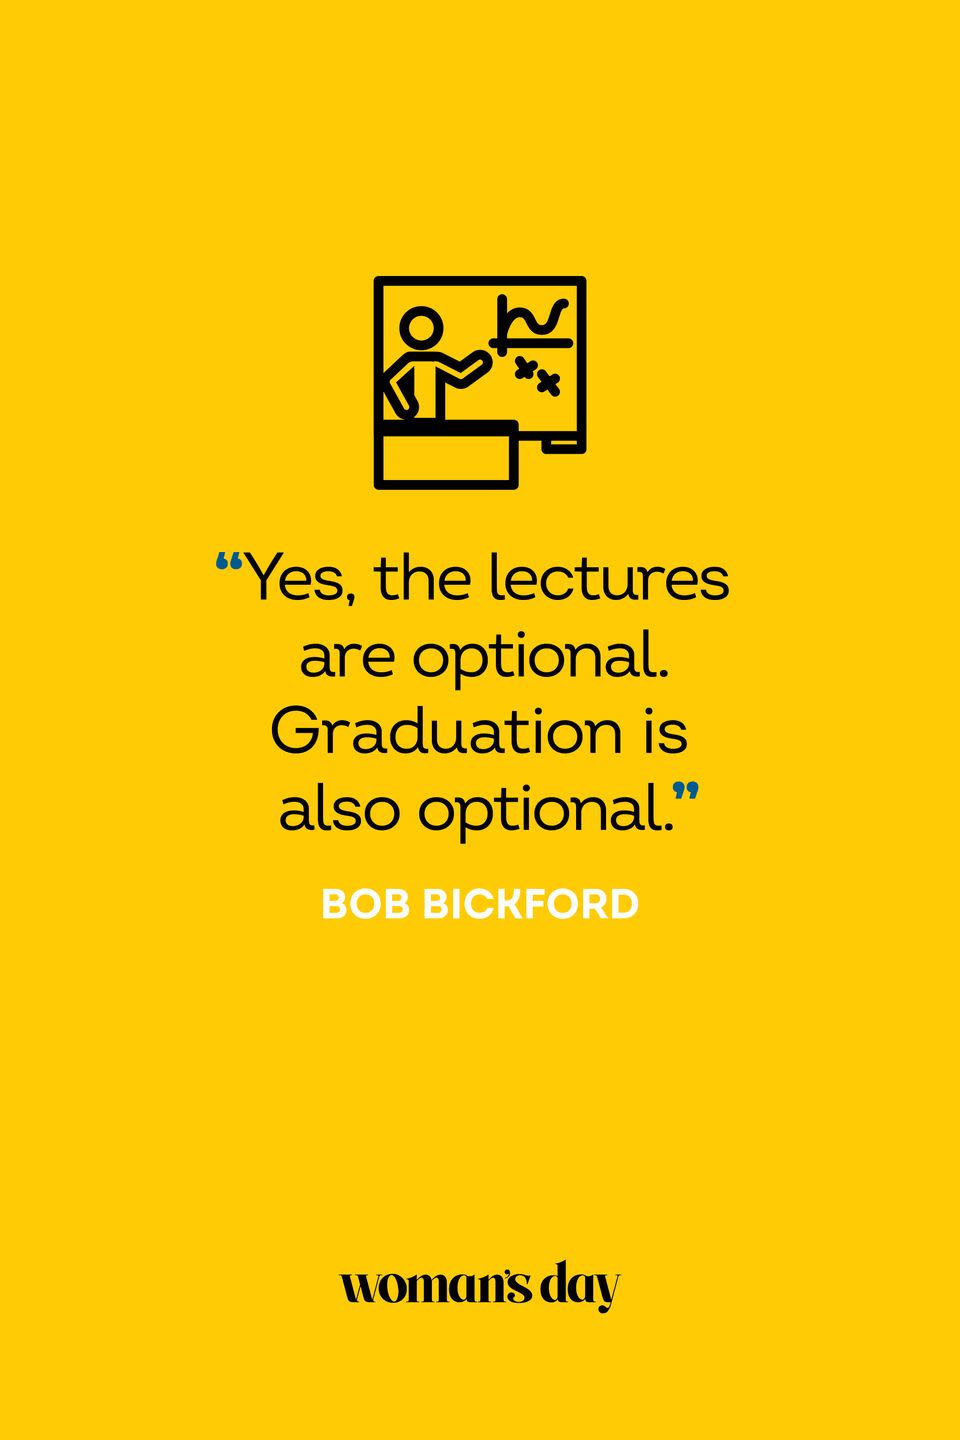 <p>“Yes, the lectures are optional. Graduation is also optional.”</p>